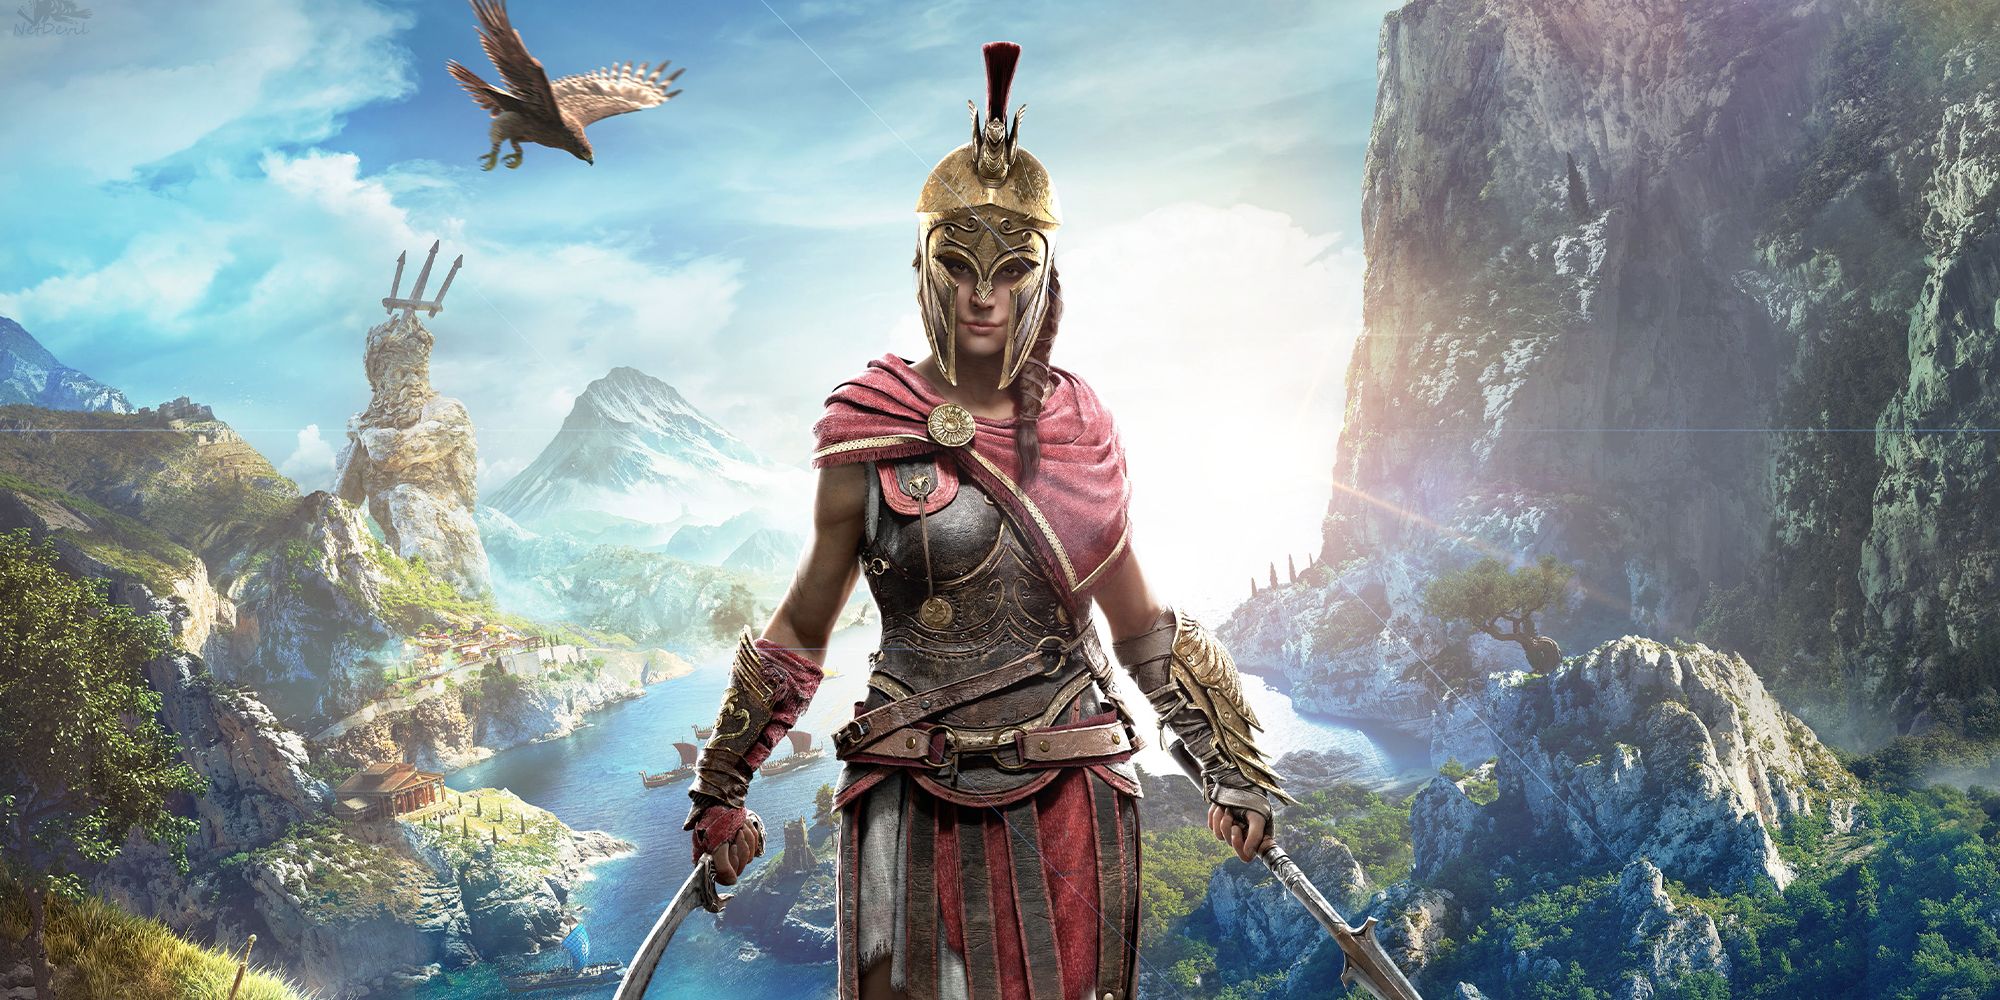 Assassin's Creed Odyssey Kassandra dressed in armor in front of landscape